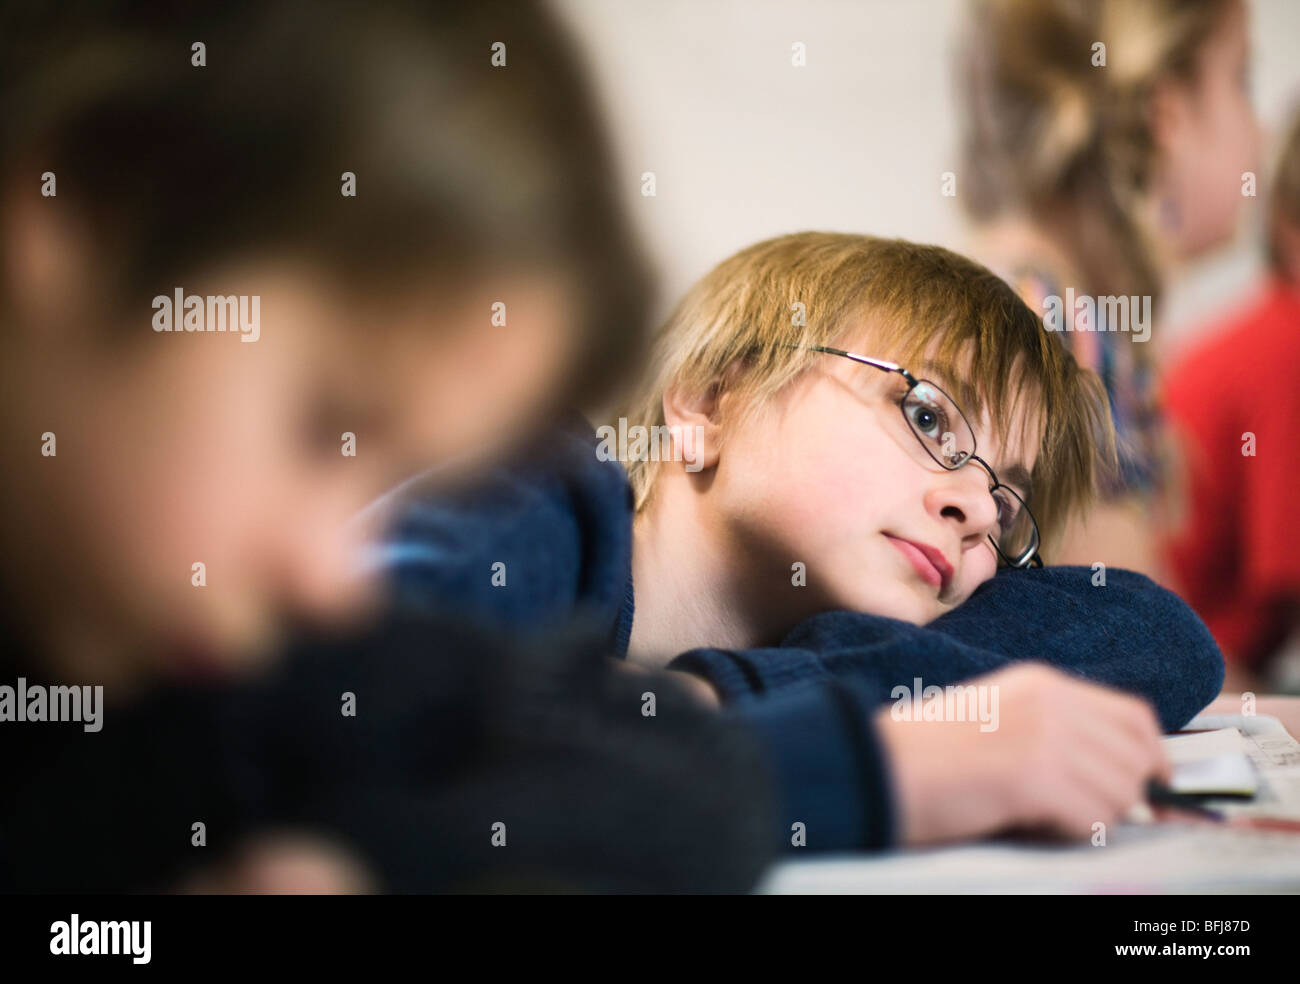 Boy daydreaming at school, Sweden. Stock Photo